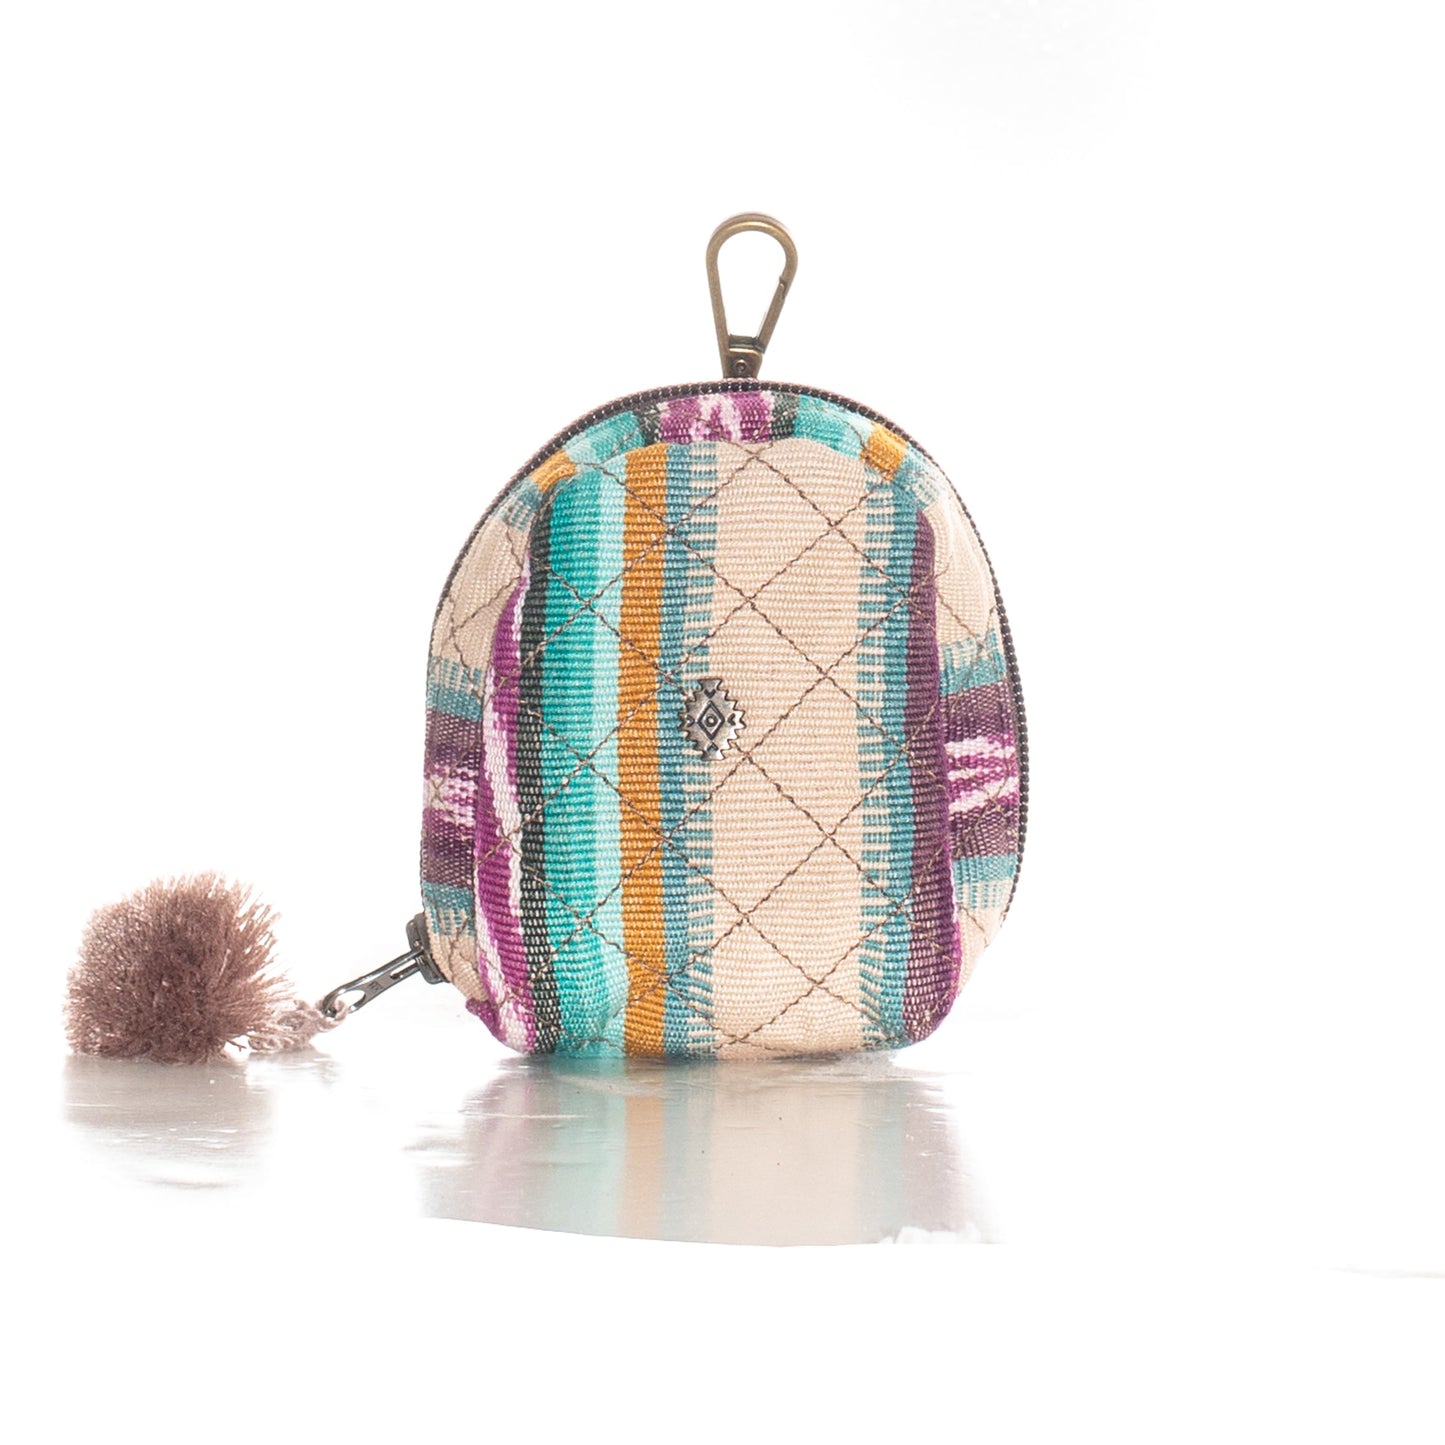 MICRO POUCH - ARTISAN COLLECTION - LOTUS - TAN TASSEL - MUSTARD LEATHER